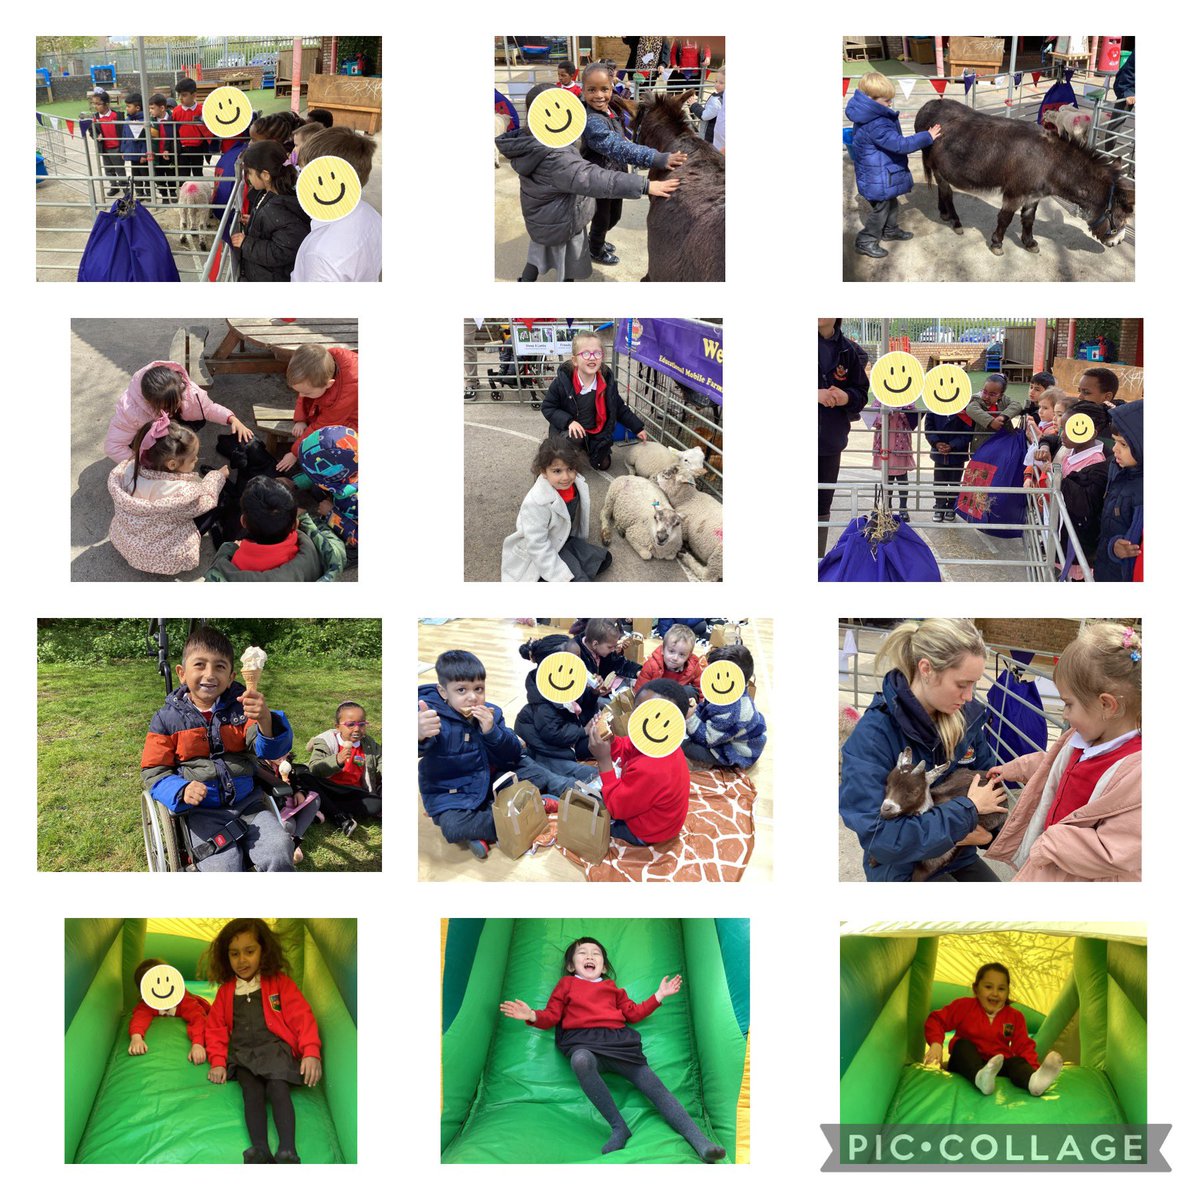 Reception has had the best day ever! We had a visit from Ark Farm, a bouncy castle and an ice cream van! We have all loved meeting so many different animals and talking about them. A fantastic experience for everyone!!